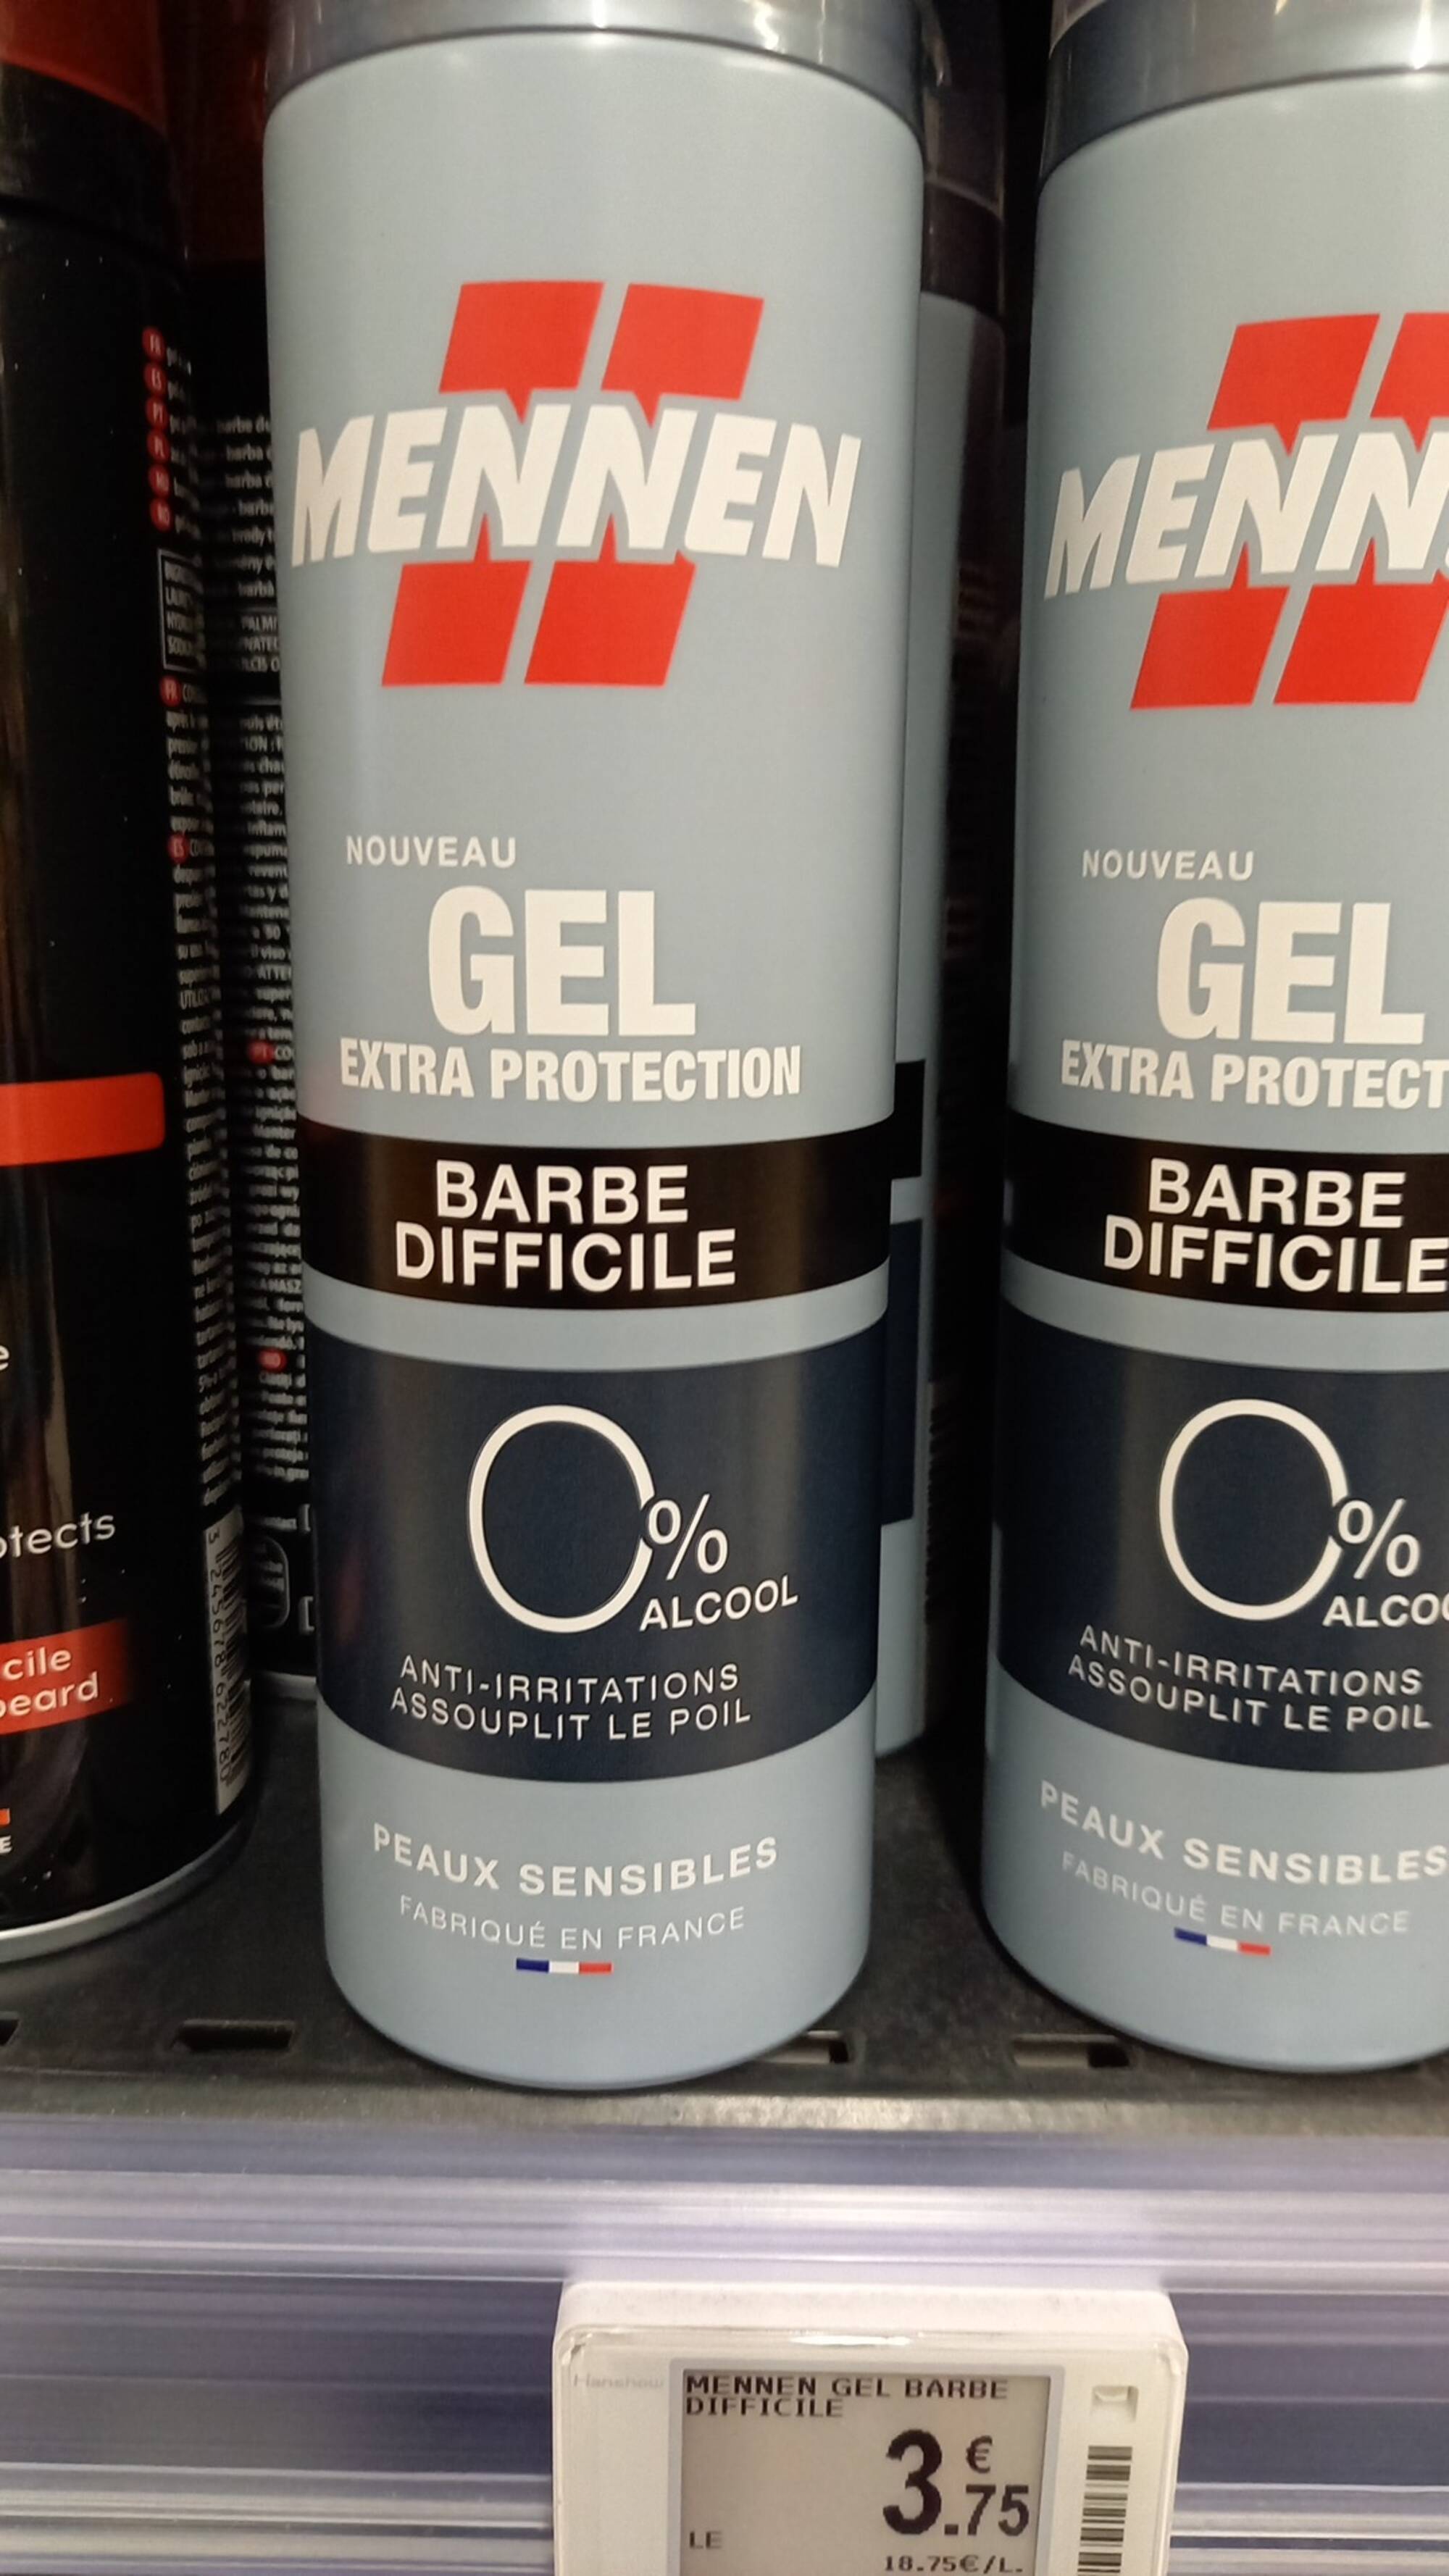 MENNEN - Barbe difficile - Gel extra protection